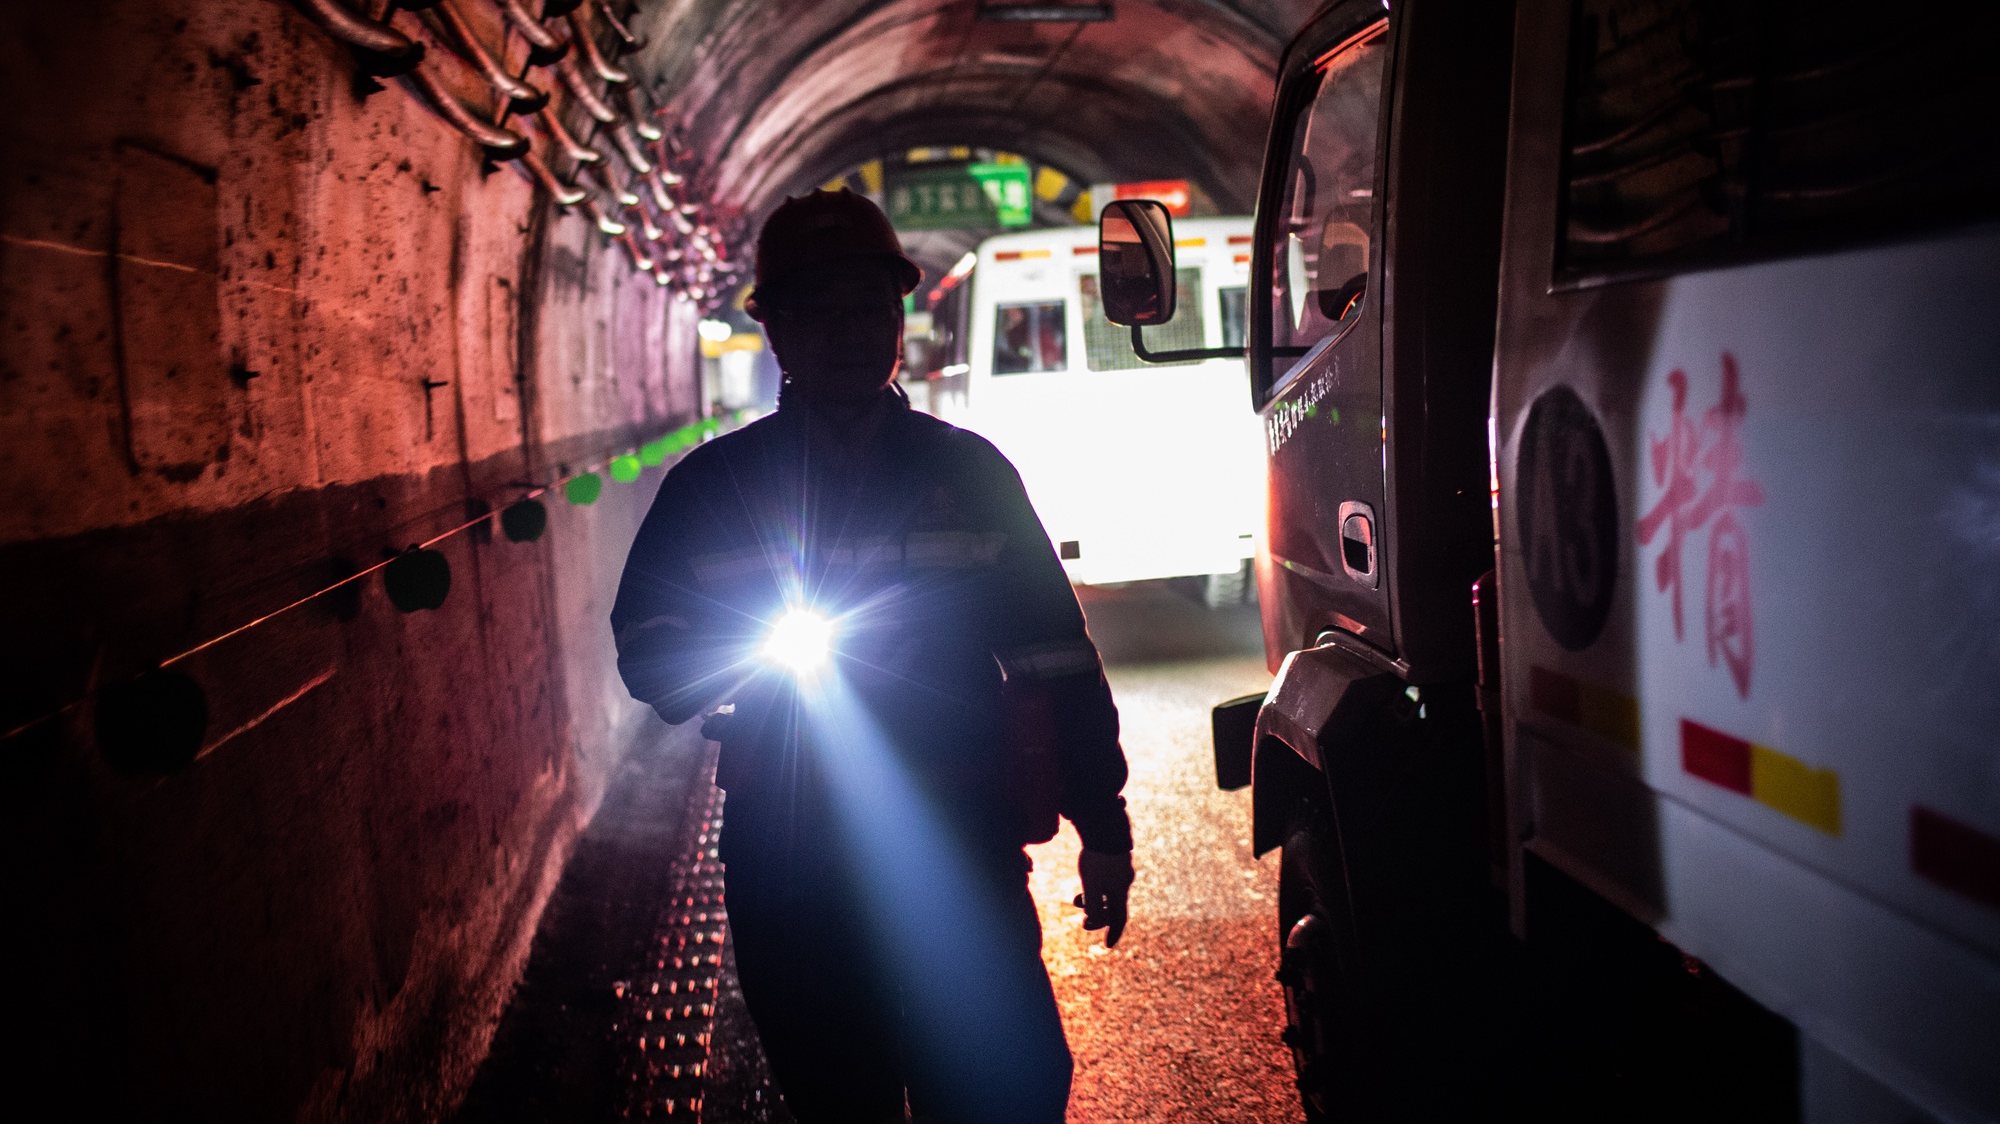 epa07061733 A coal miner walks in the tunnel which leads to a training area and the coal mine of Huangling Mining, in Diantou, Shaanxi Province, China, 29 September 2018 (issued 01 October 2018). Huangling Mining has four mines with a total output of 16 million tons of coal. China is the largest consumer and producer of coal in the world and is considered the largest user of coal-derived electricity.  EPA/ROMAN PILIPEY